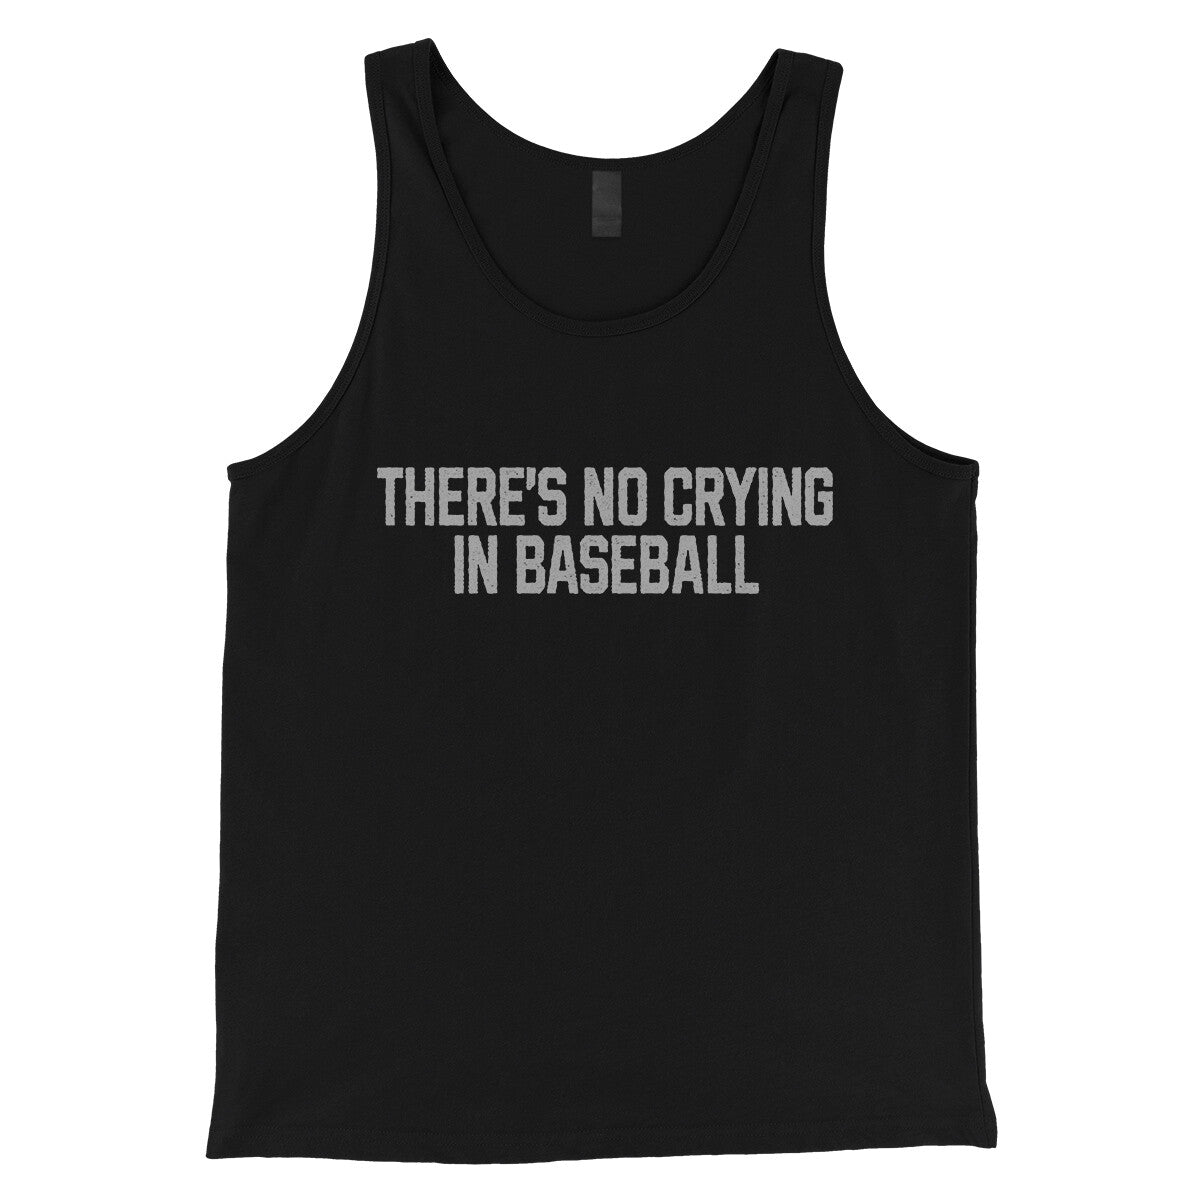 There's No Crying in Baseball in Black Color